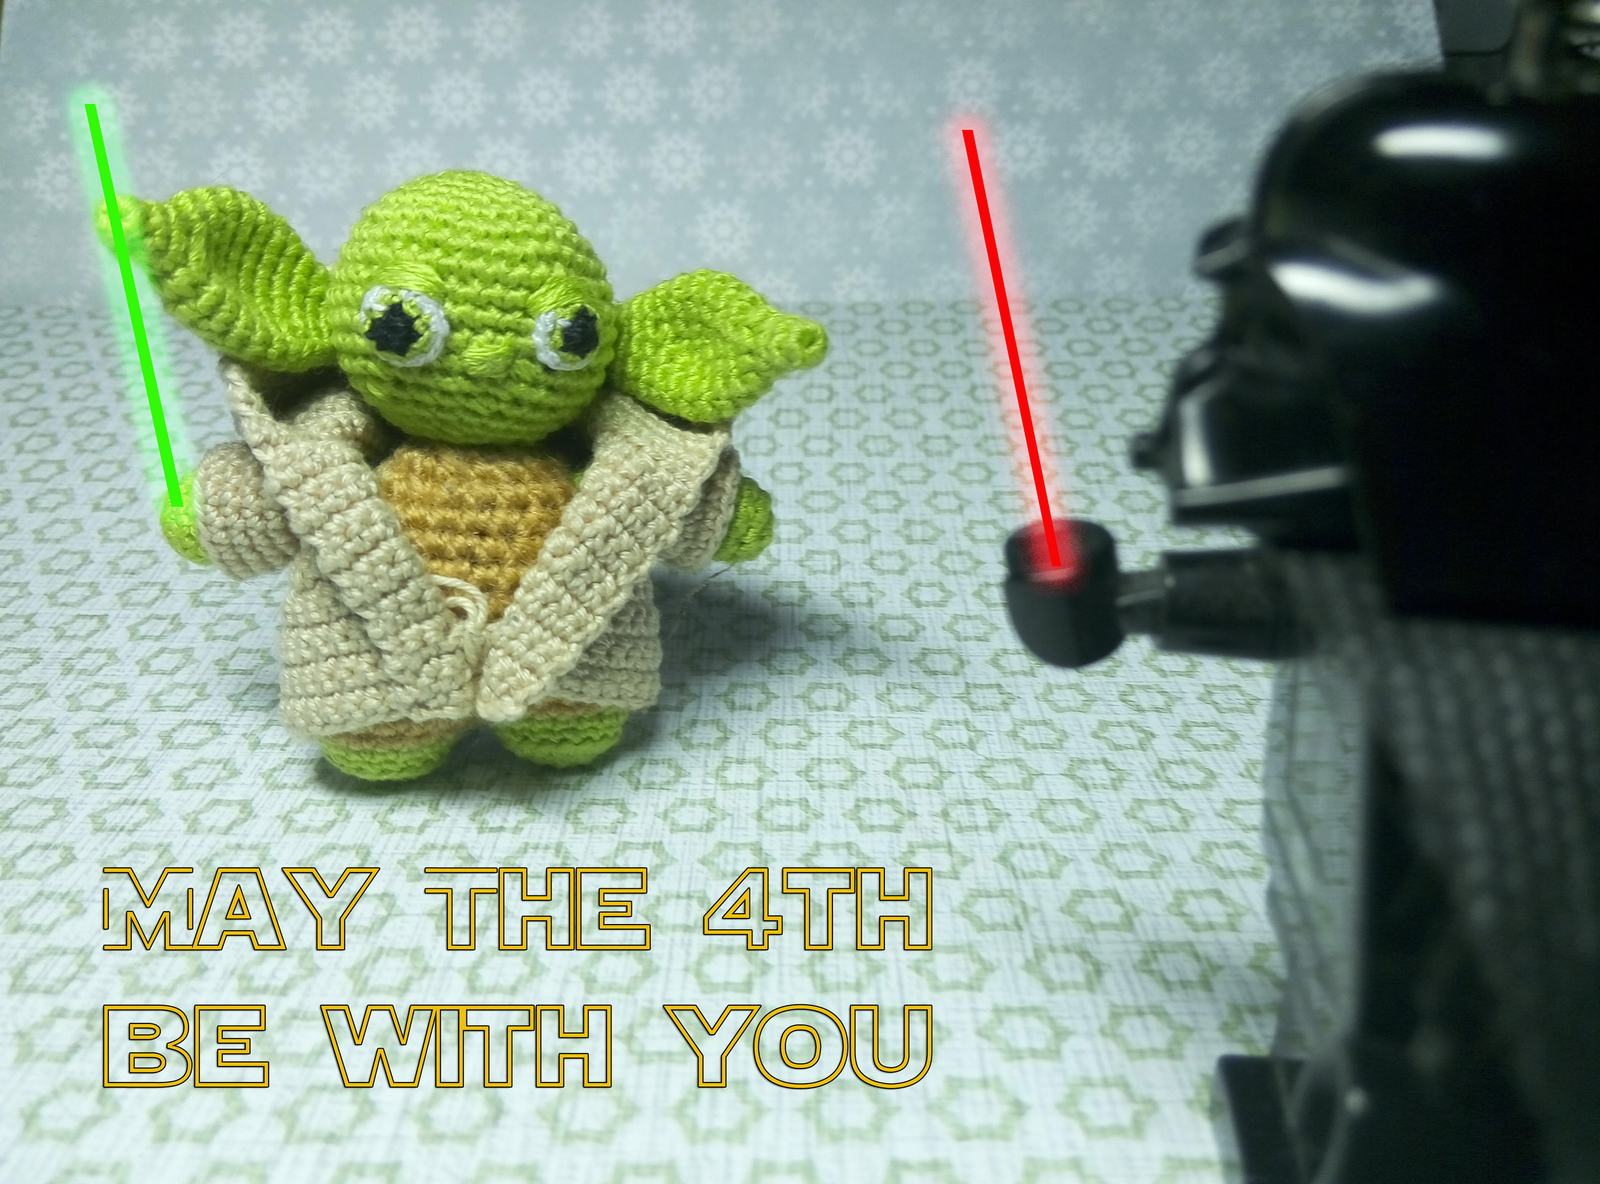 May the 4th be with you - My, Star Wars, Amigurumi, Knitting, Needlework without process, Longpost